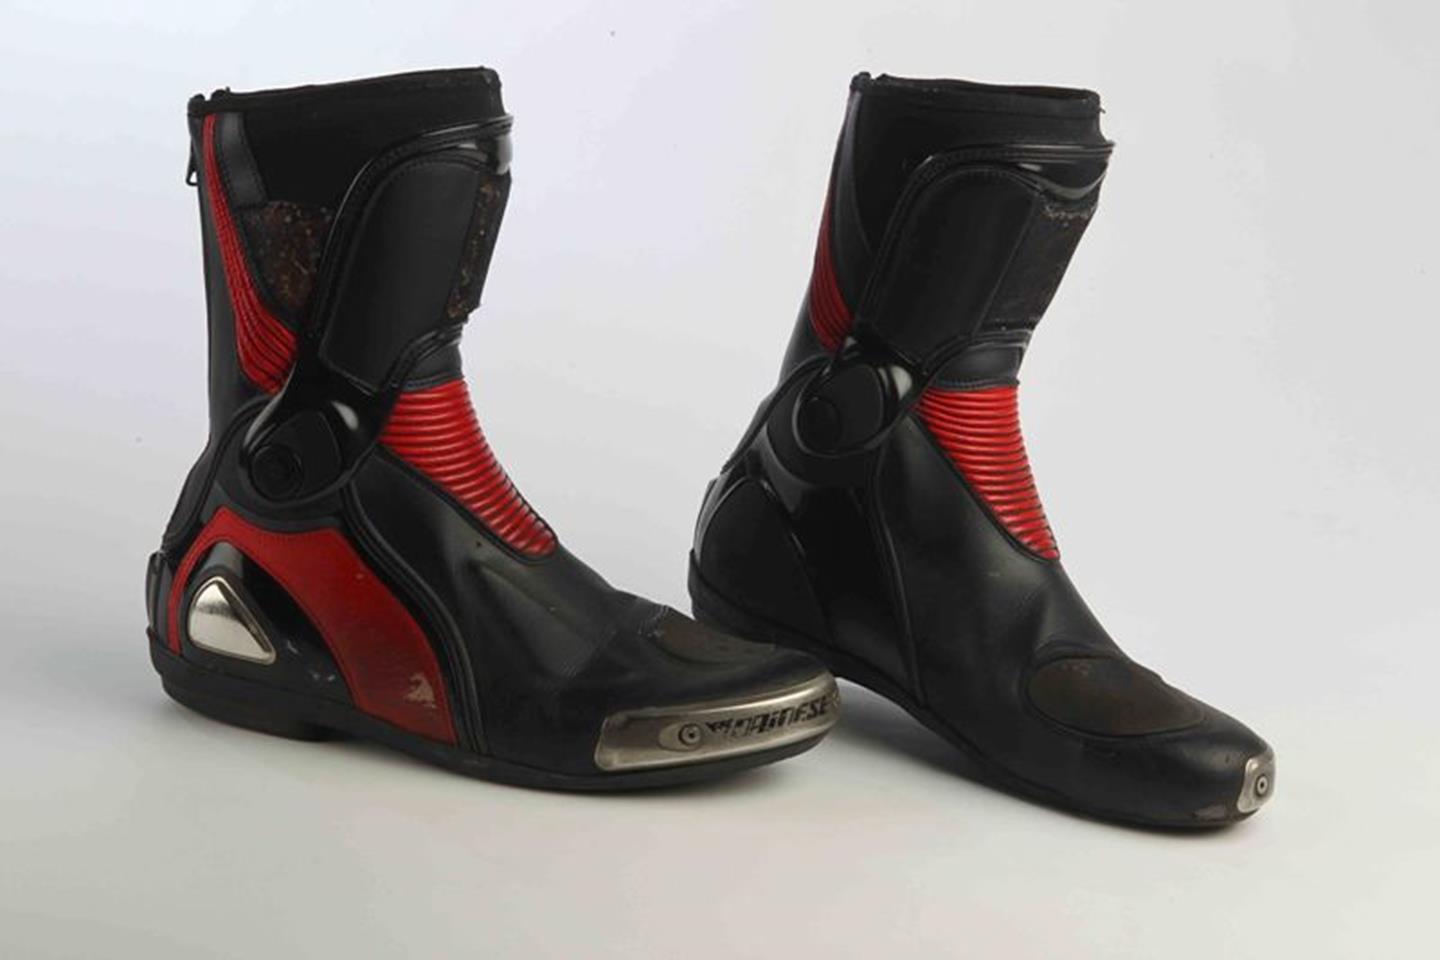 Dainese Torque In boots | MCN